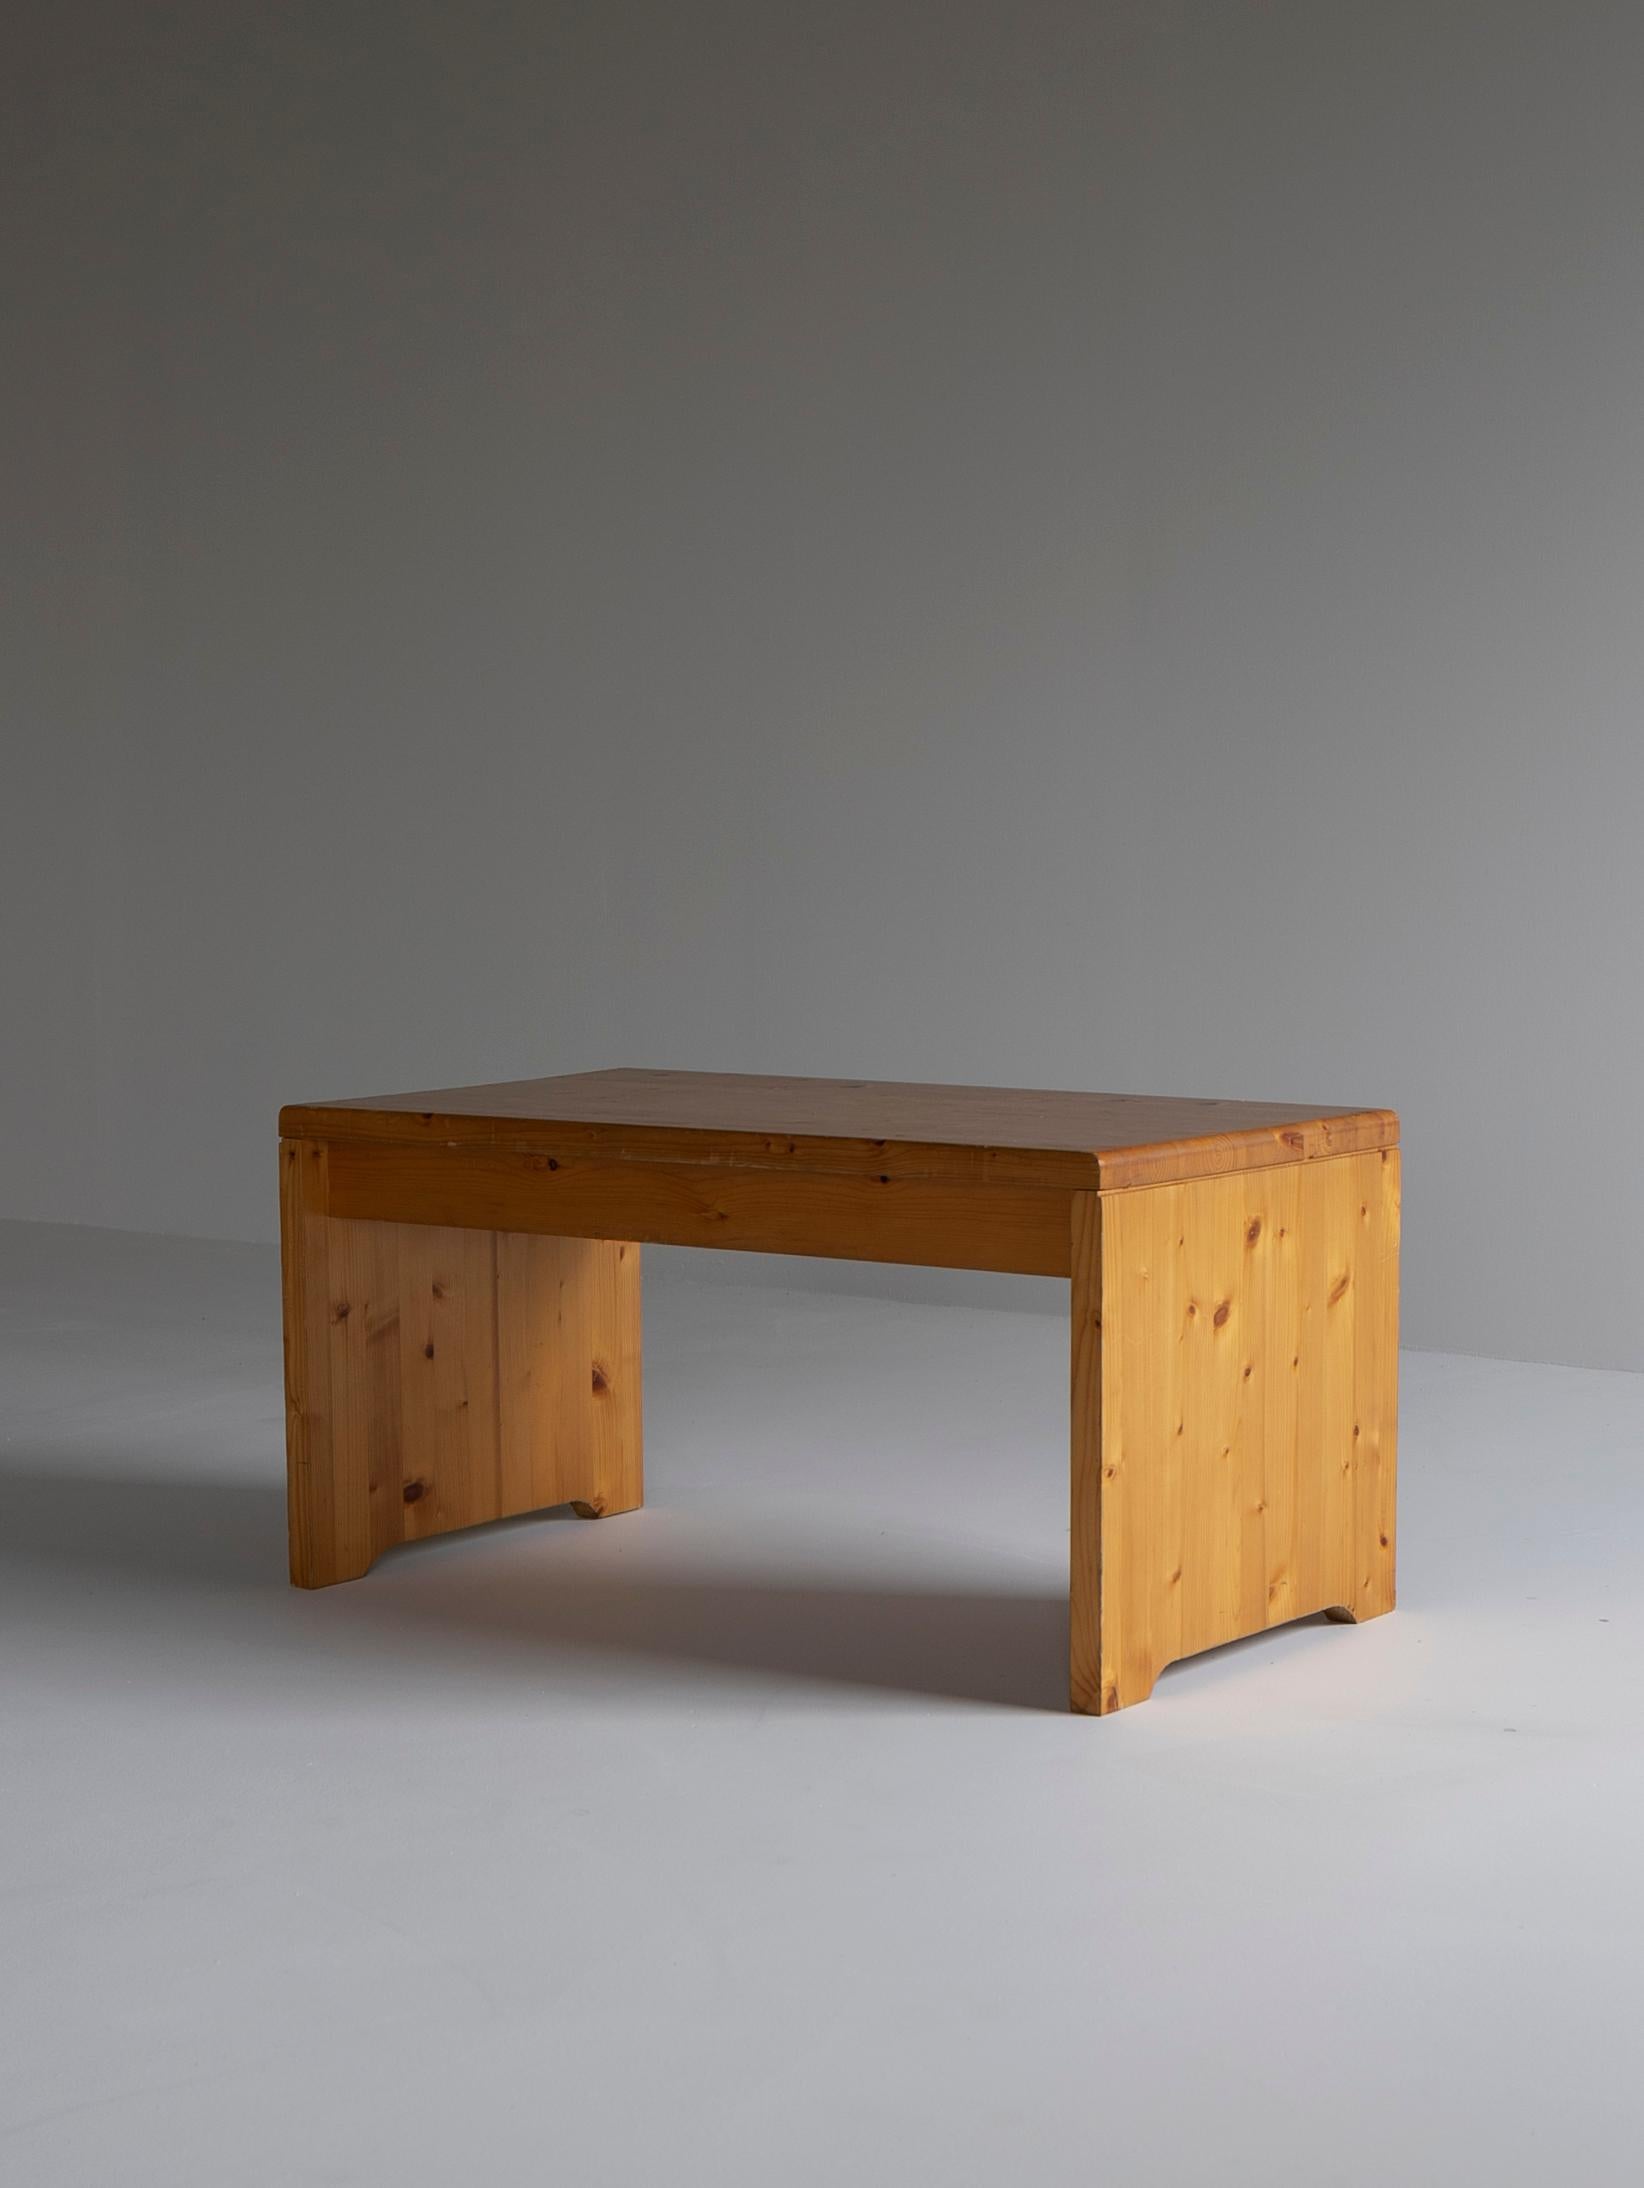 Low table used in Les Arcs 1600.
This piece was designed for Les Arcs 1600, one of Charlotte Perriand's most important works.
The material is made of Swiss pine wood.
Can be used as a low table or bench.